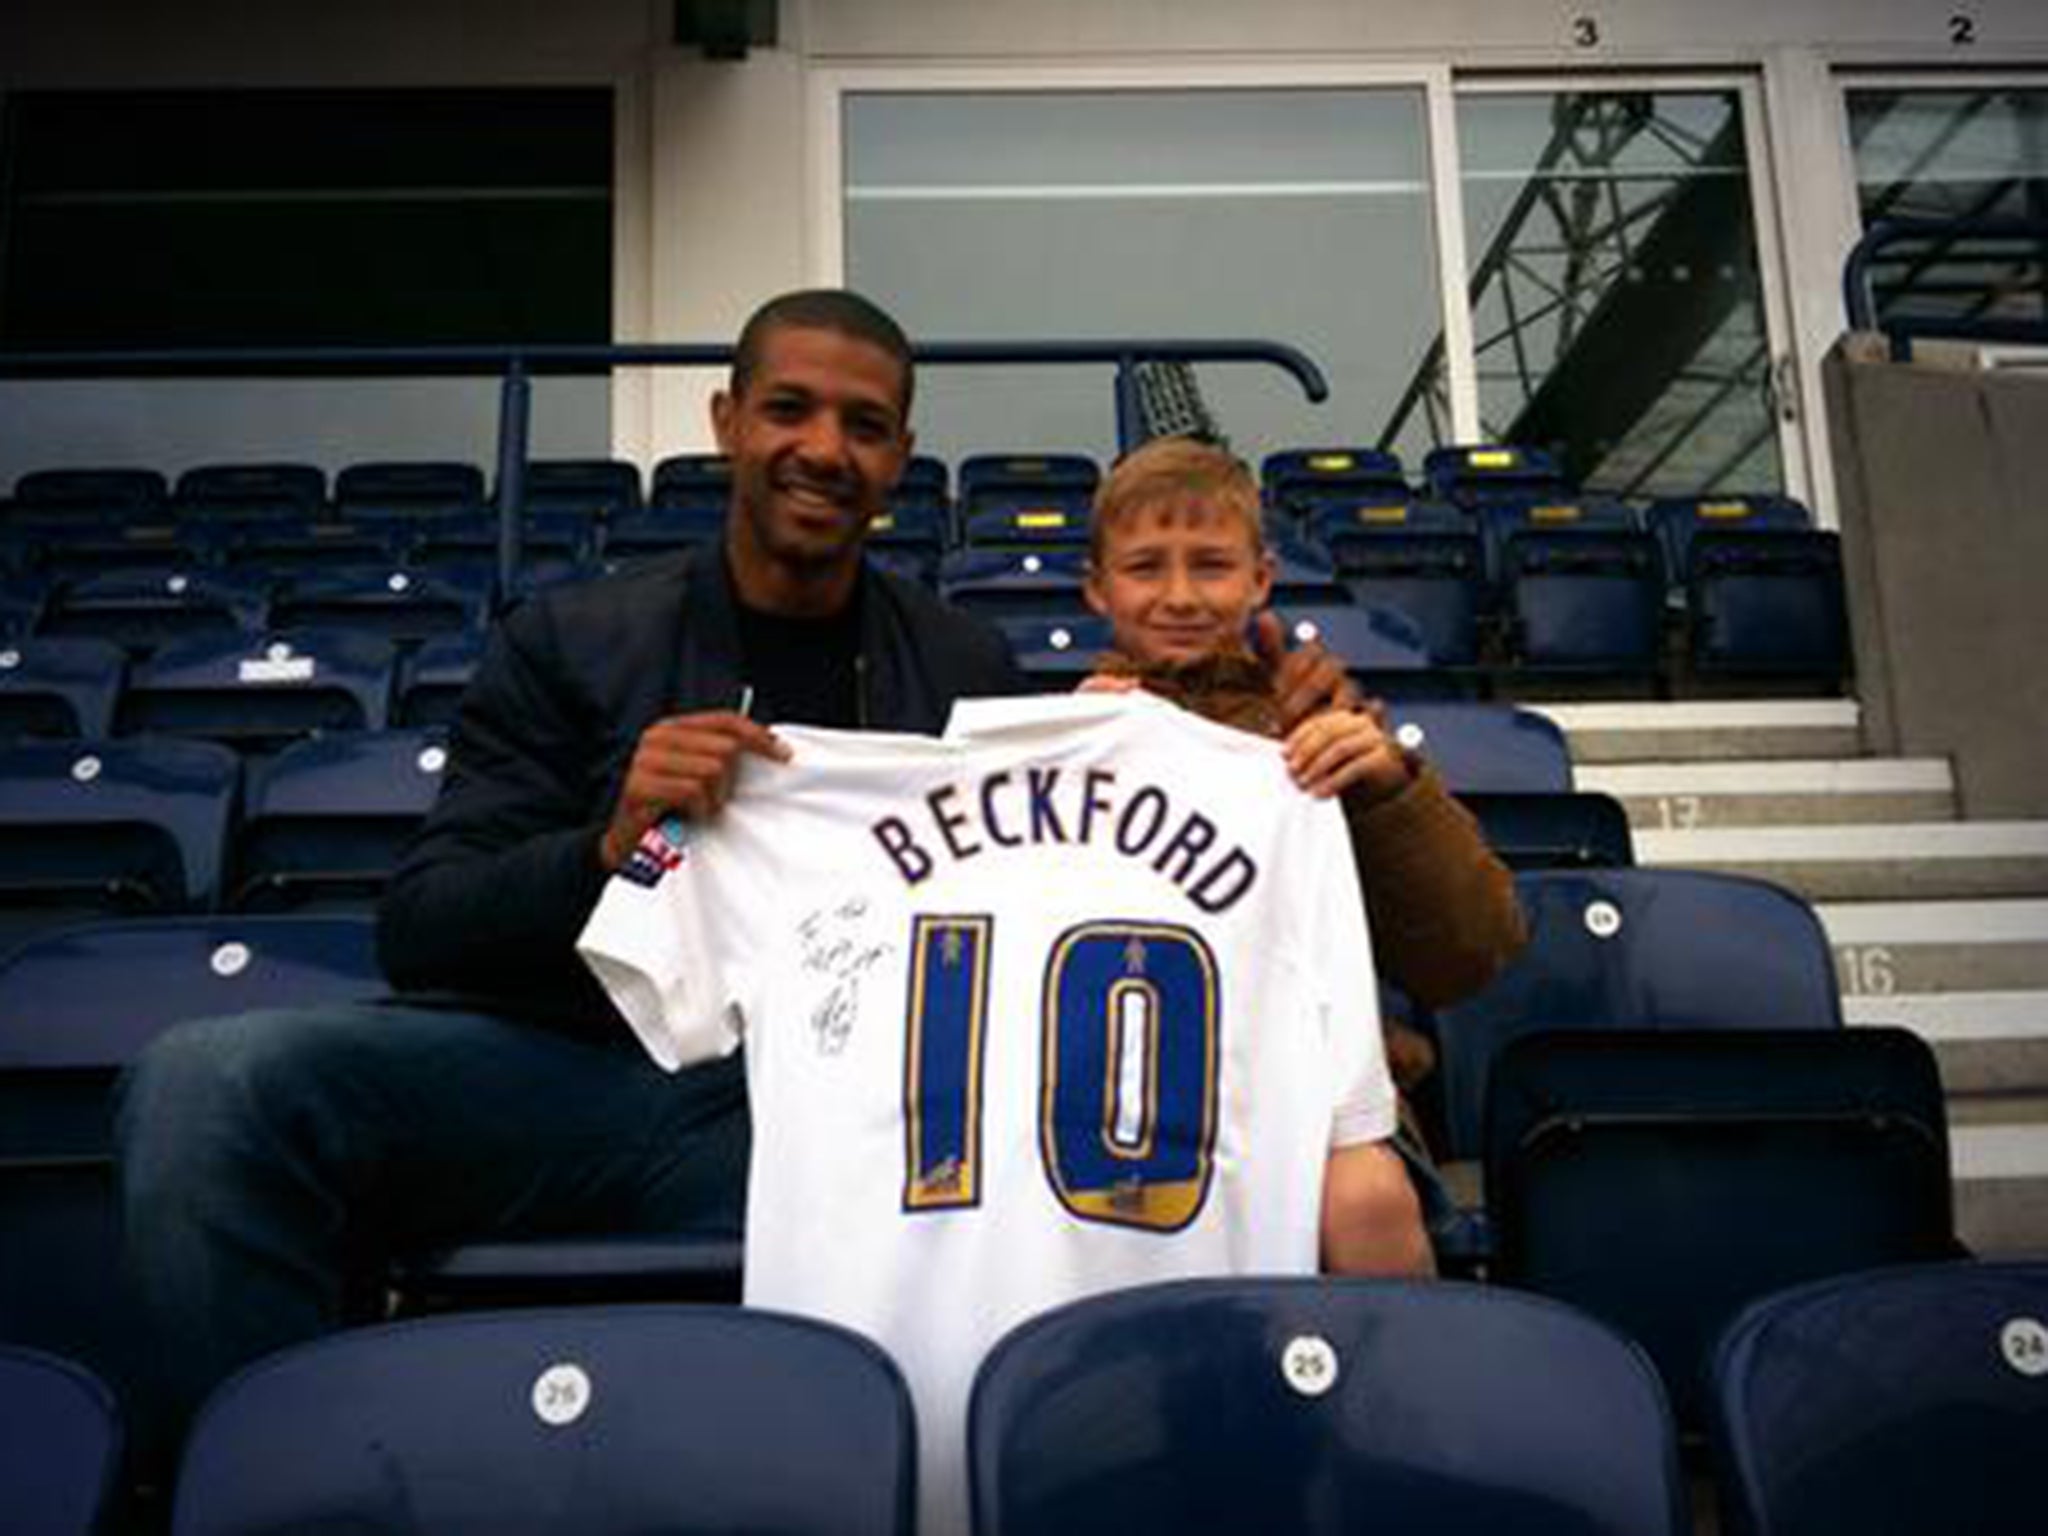 Jermaine Beckford presents Ted Dockray with his signed shirt